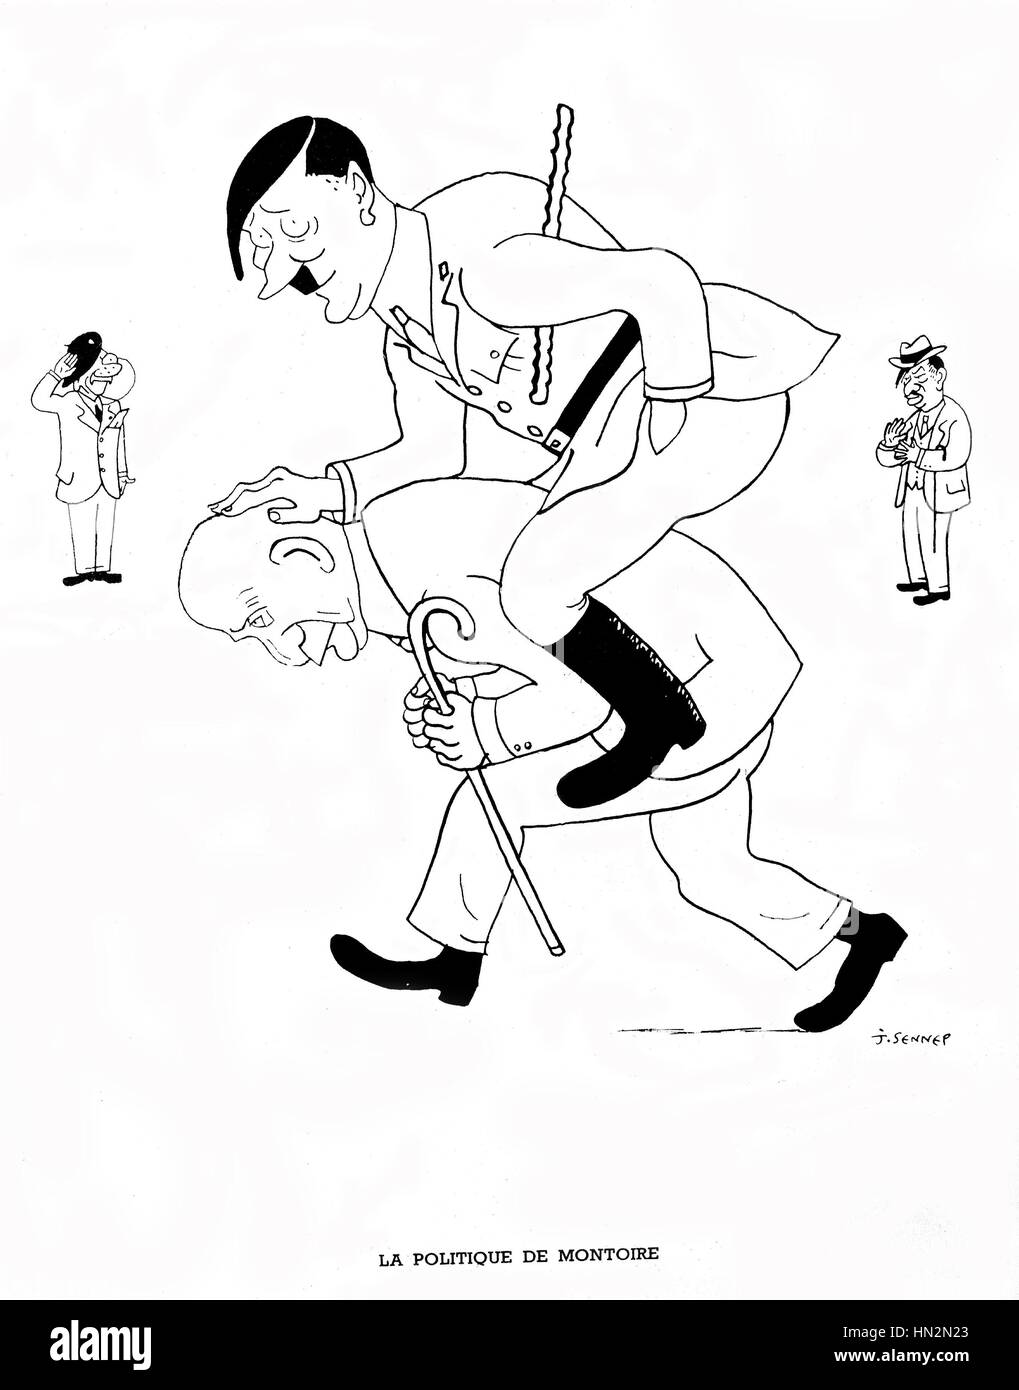 Caricature by Sennep Vichy governement: 'The Montoire's policy' with Hitler and Petain October 24, 1940 France, Second World War war Stock Photo